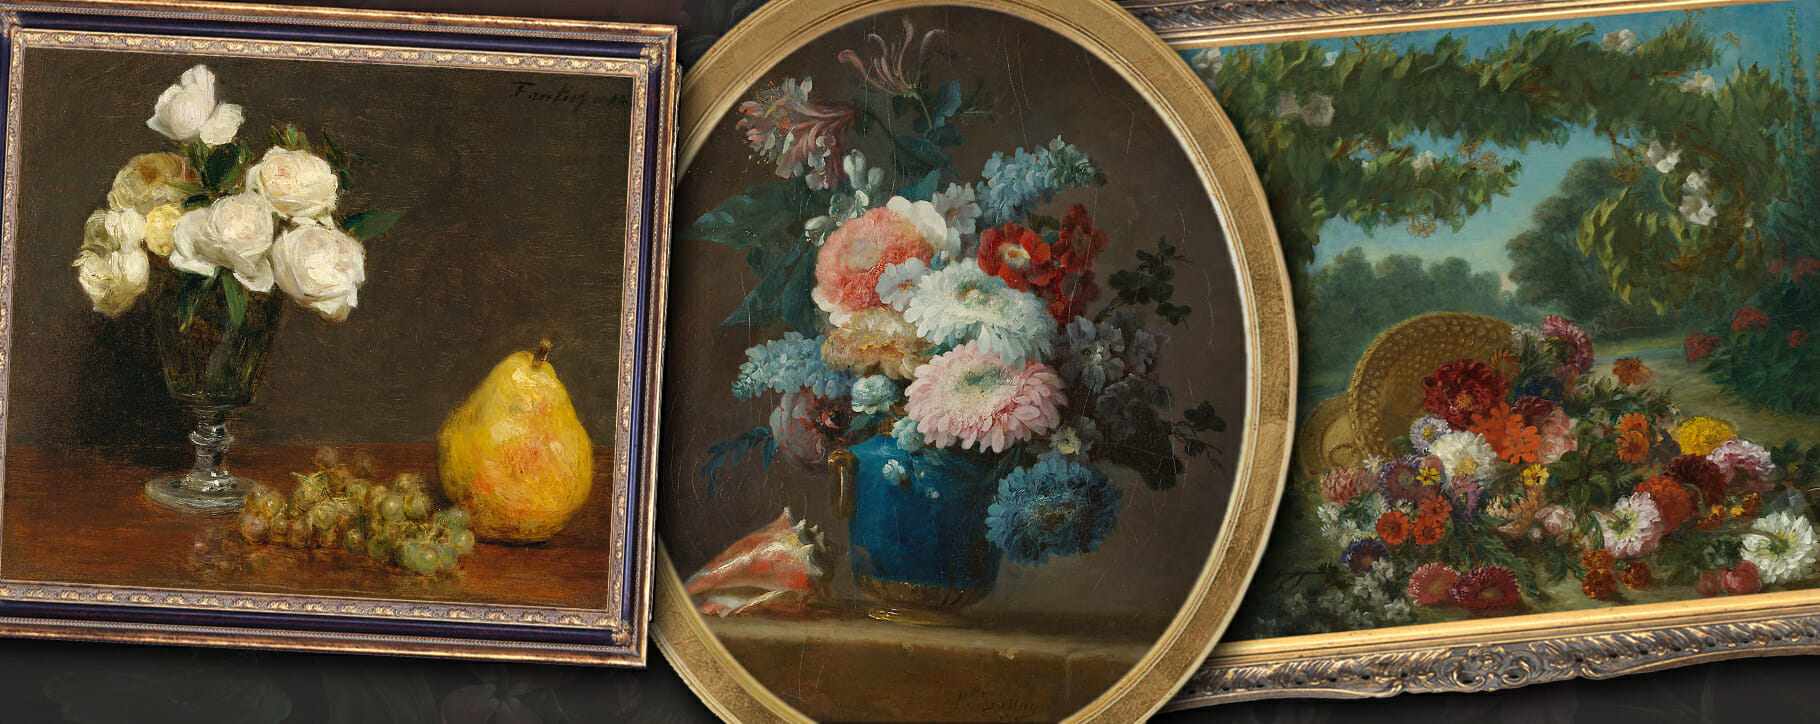 Still Life Painting Examples